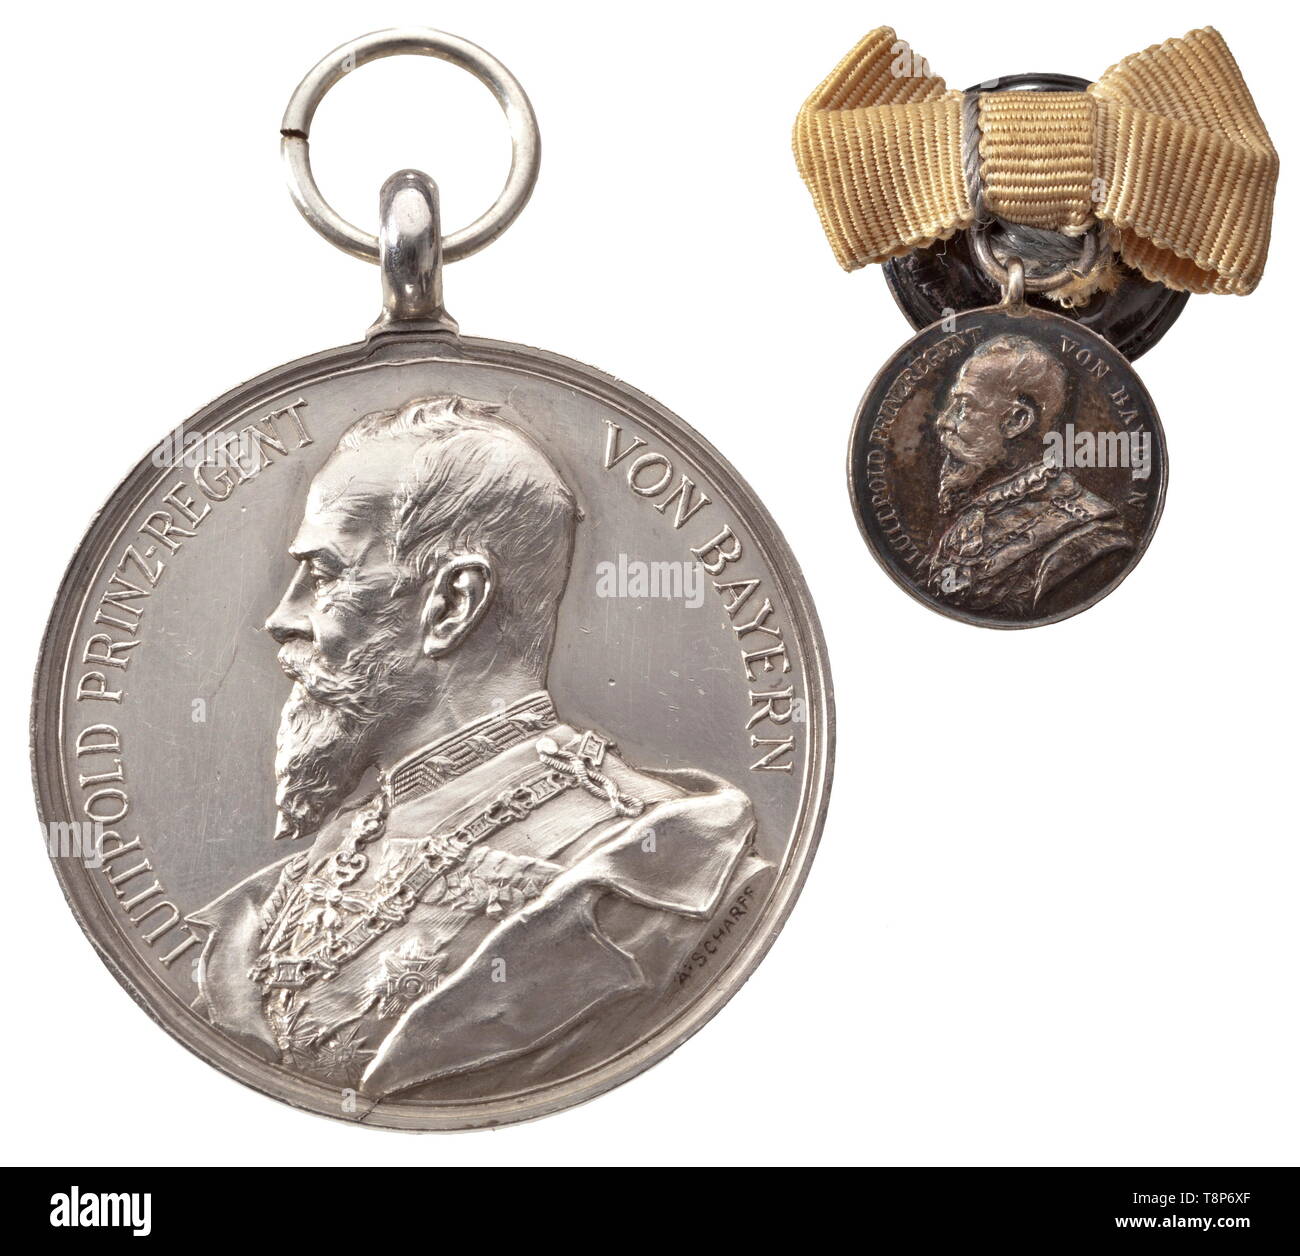 Rittmeister Friedrich von Sigriz - a lifesaving medal with document and miniature The medal of the type instituted in 1889 with the likeness of Prince Regent Luitpold from a punch cutter models by Professor 'A. Scharff' in Vienna. The medal, which was also struck in this form and bestowed after the monarchy from 1920 to 1931, is in an outstanding state of preservation and except for an edge knock and a few scratches is in mint-fresh condition. Diameter 39.7 mm. Weight 30.9 g. Included is the 16 mm miniature on a buttonhole ribbon bow as well as t, Additional-Rights-Clearance-Info-Not-Available Stock Photo